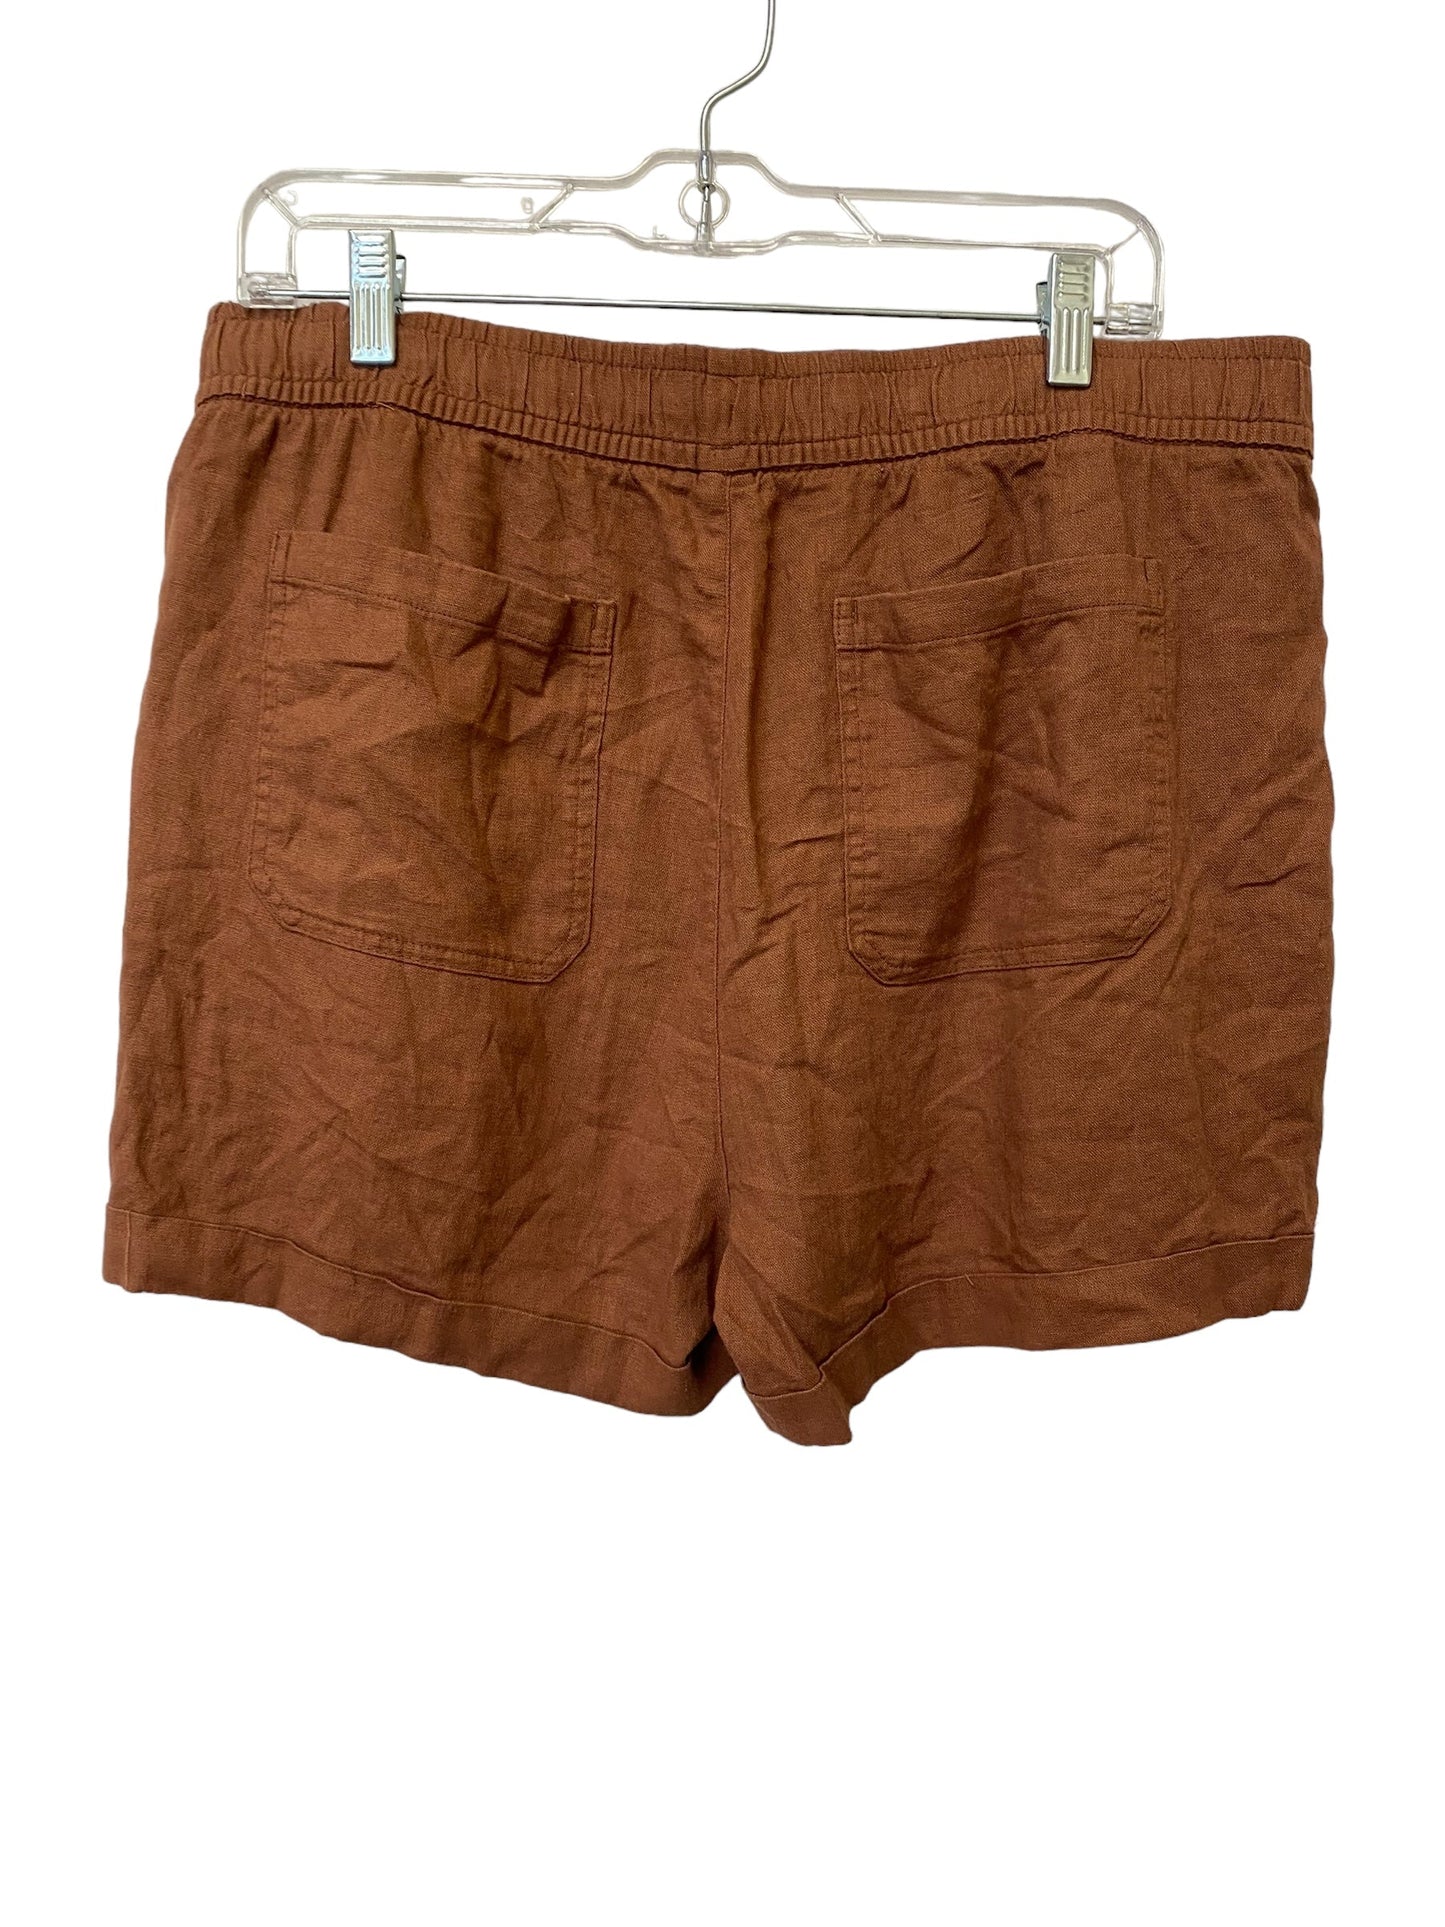 Brown Shorts Old Navy, Size L